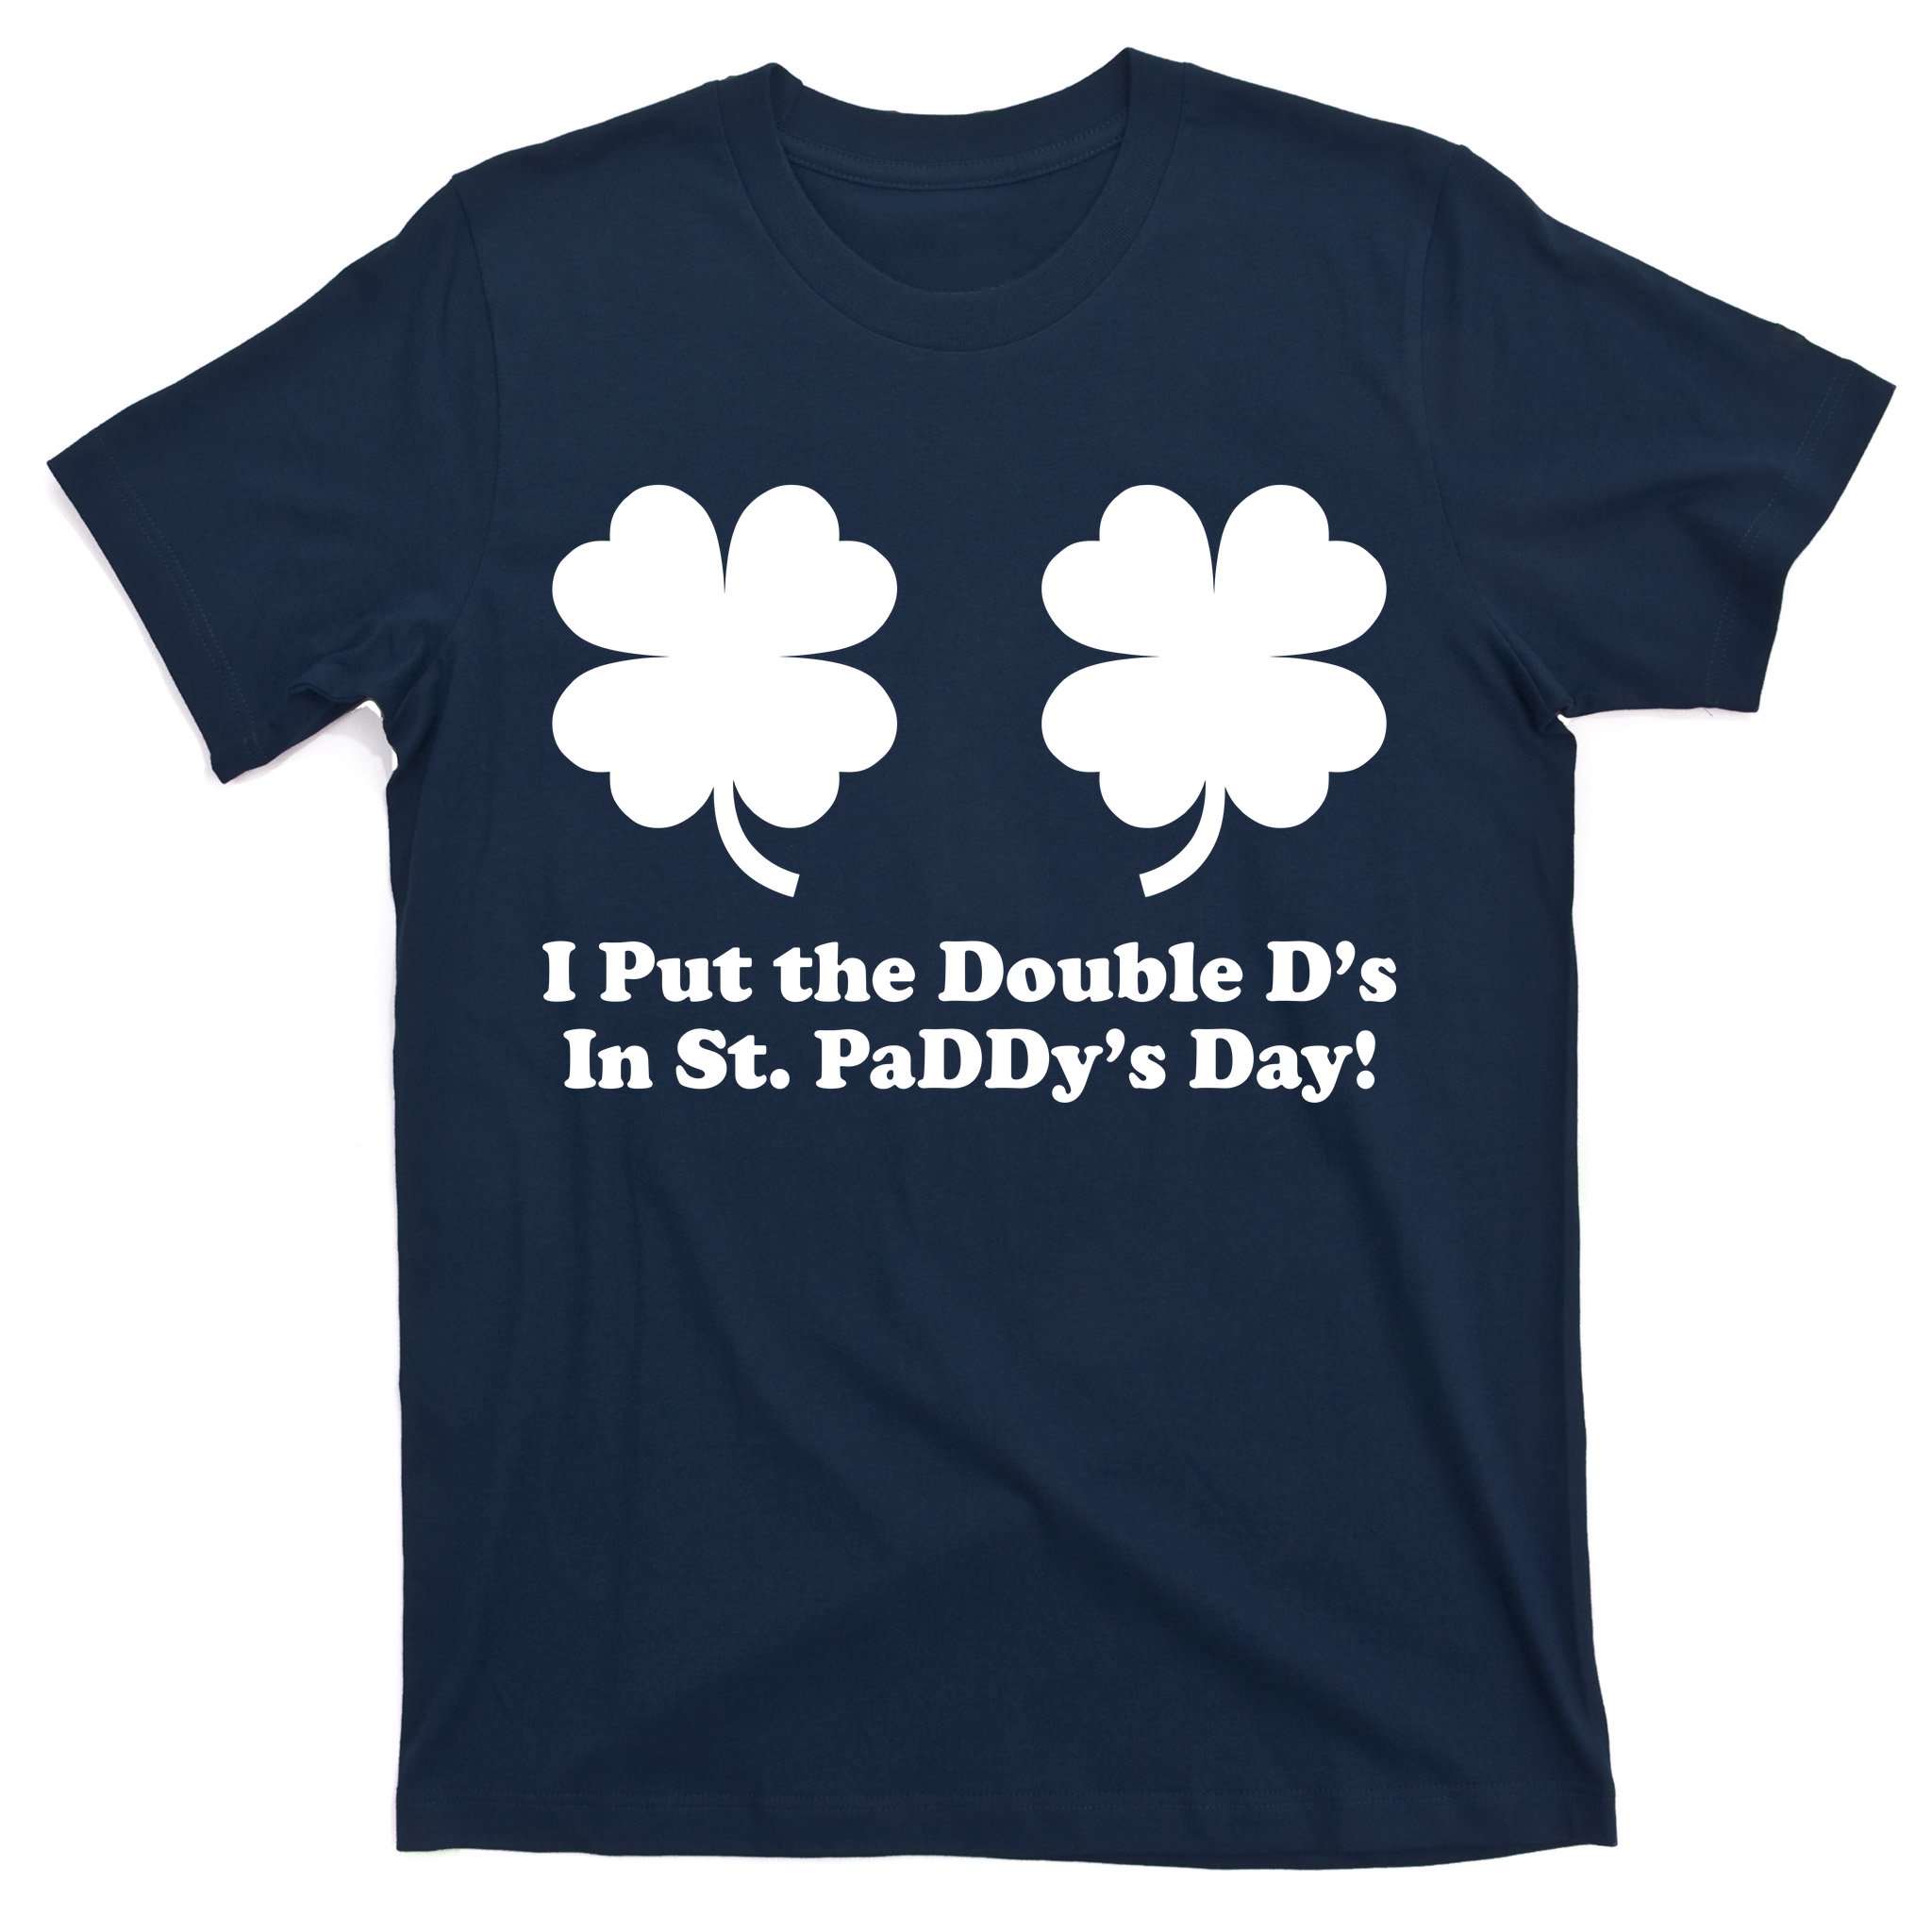  Womens I Put The Double Ds In St Paddys Day Funny St